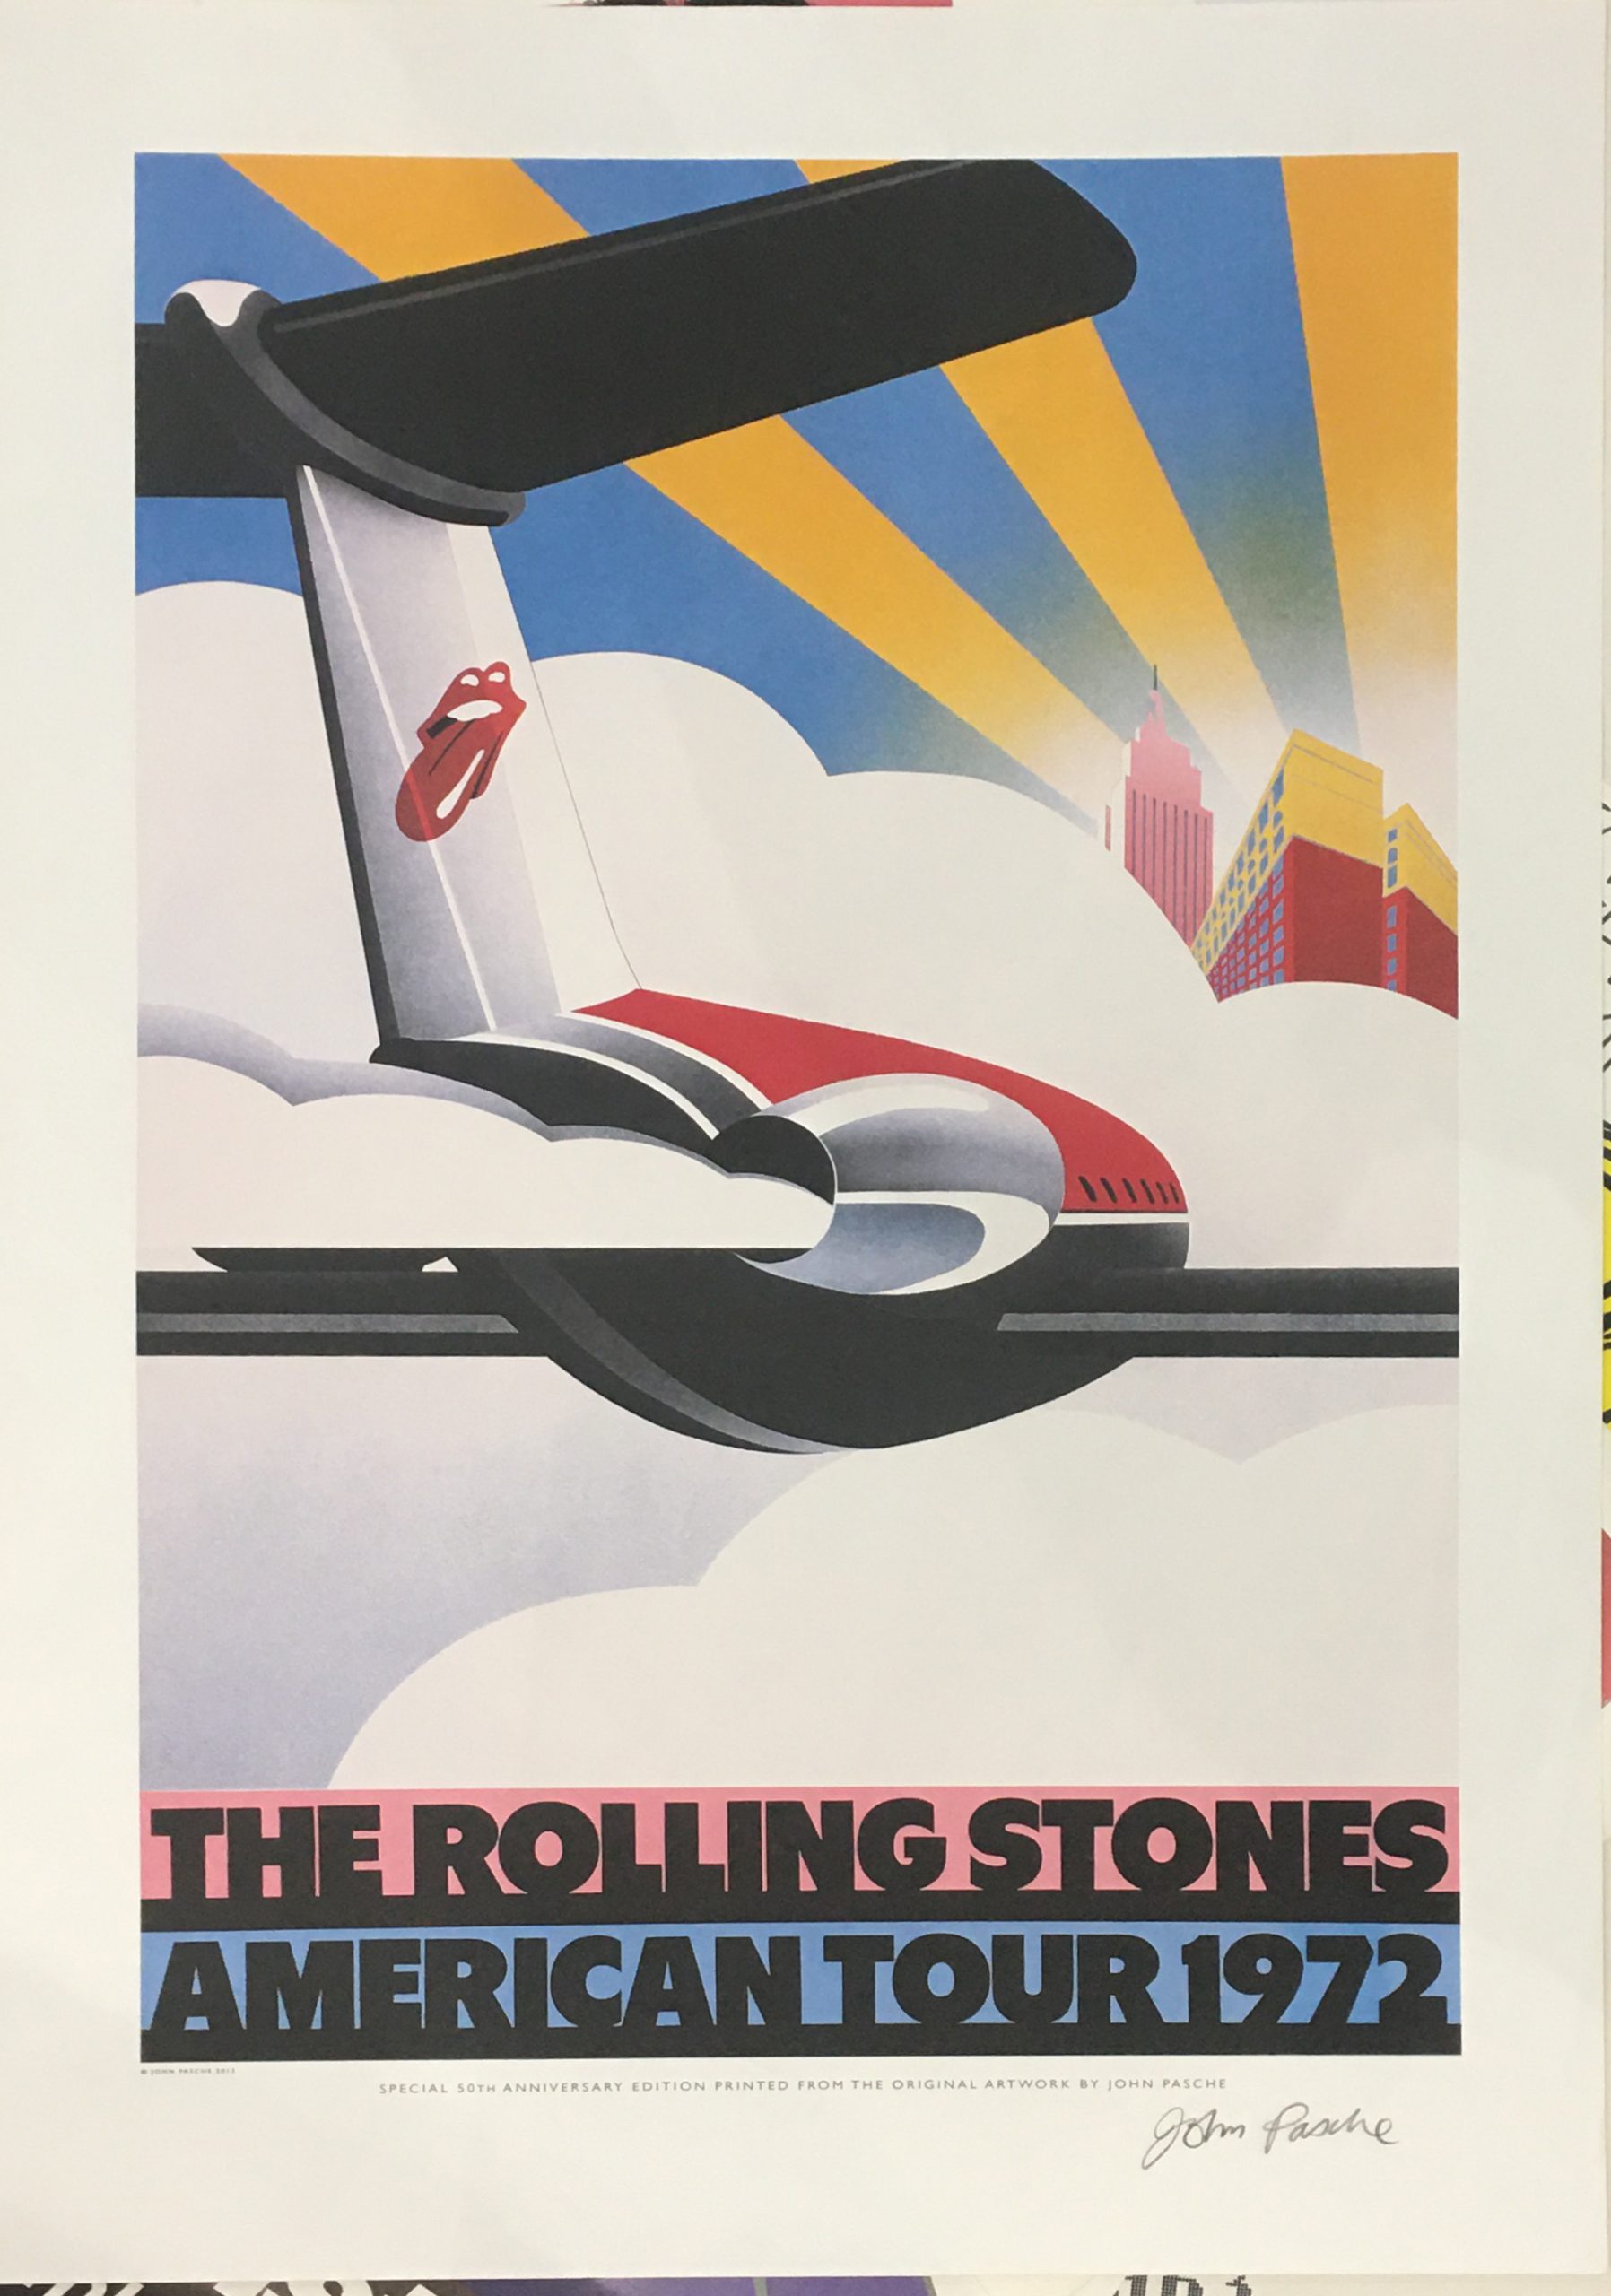 The Rolling Stones 1972 American Tour Poster